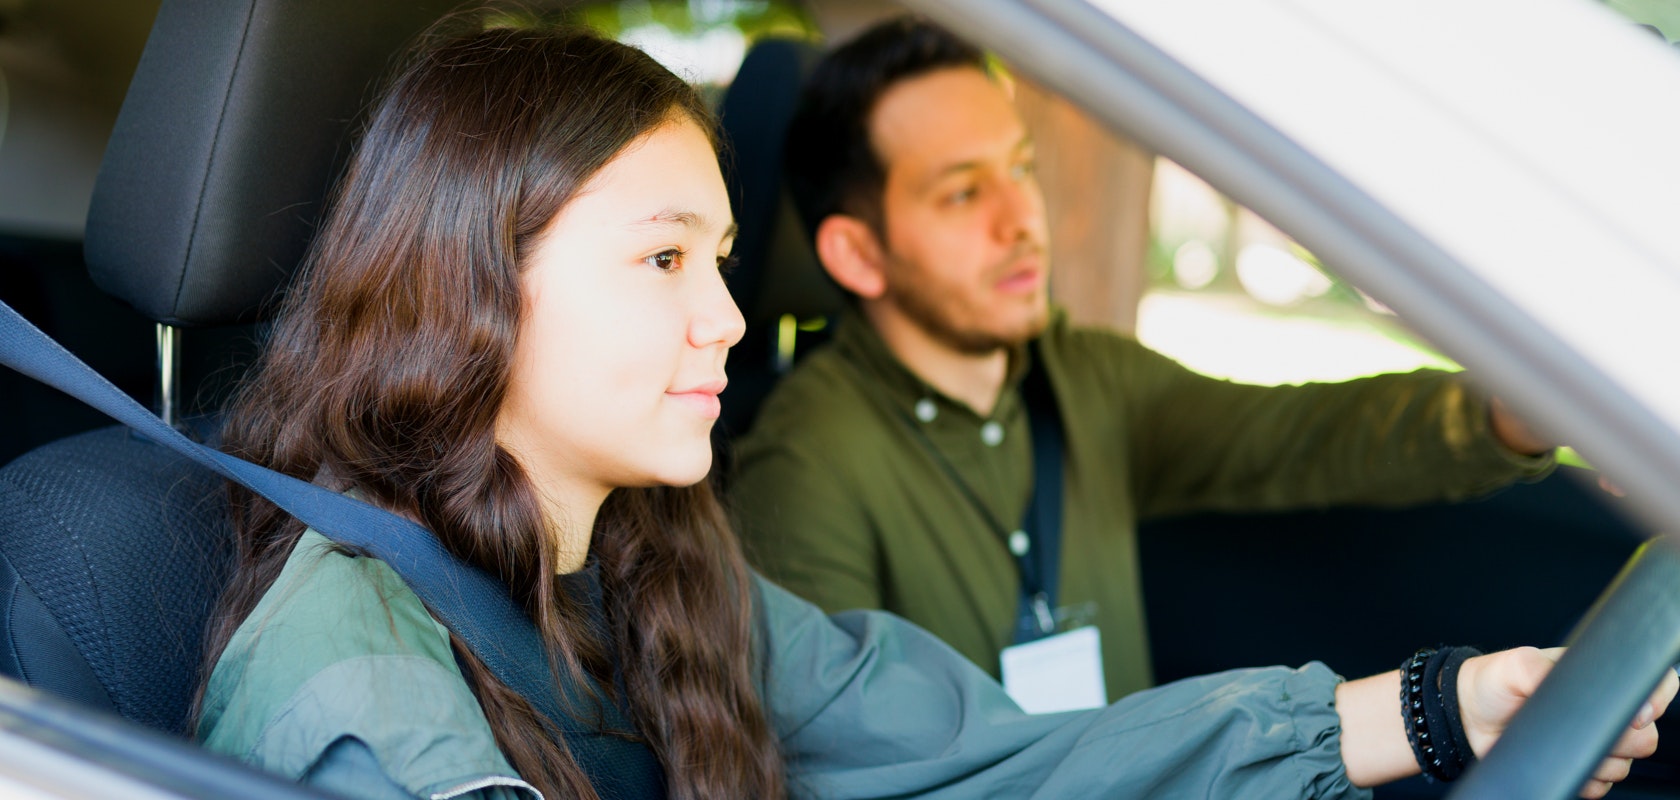 Driving instructor and student in car during driving lesson